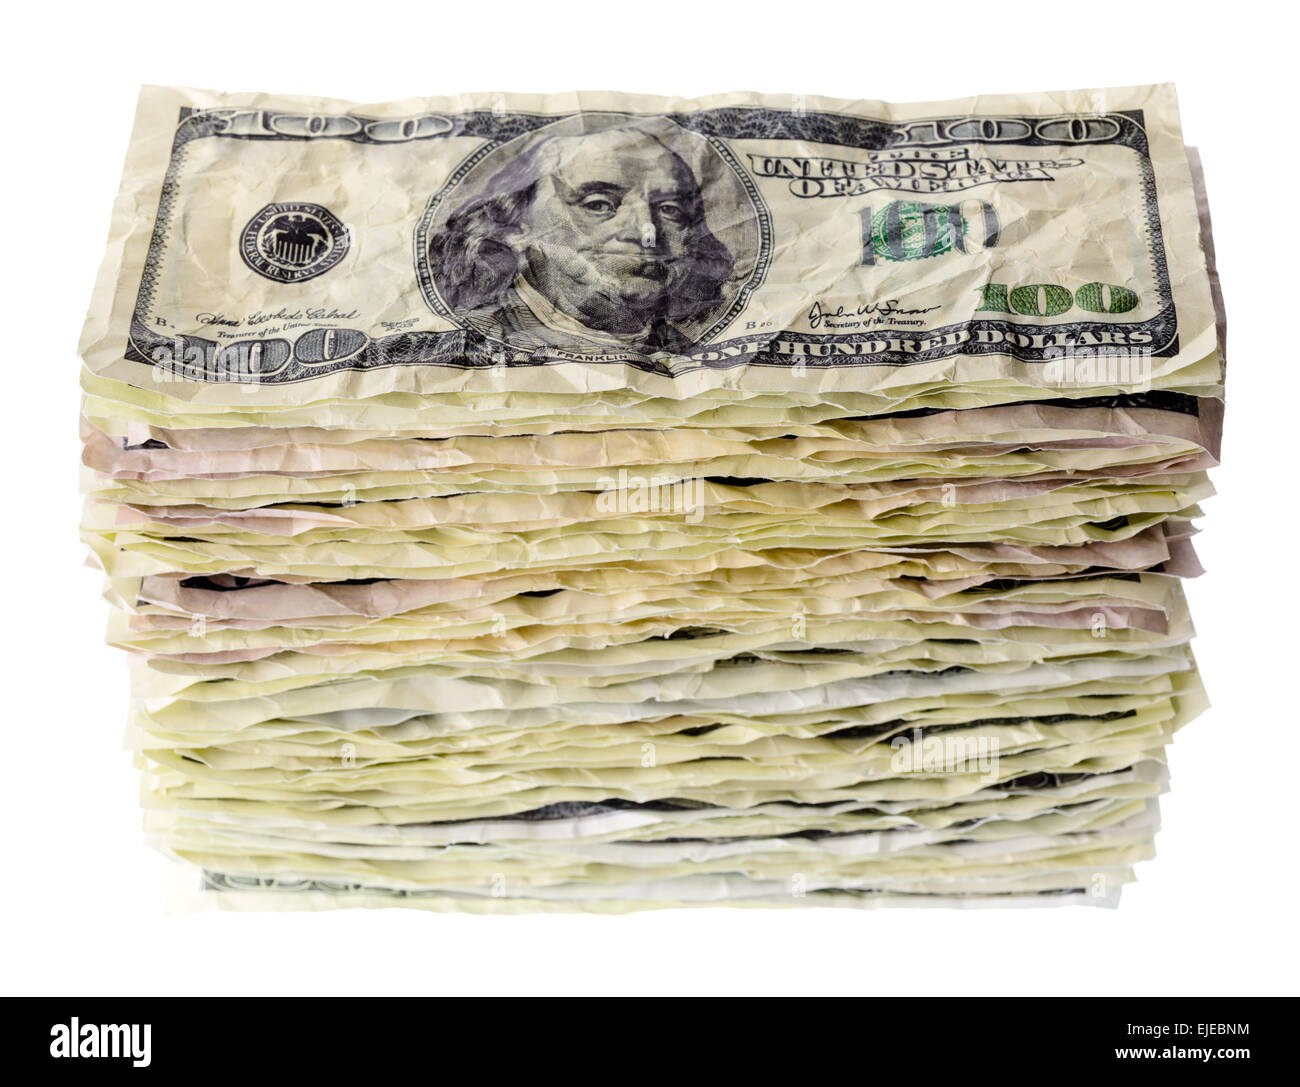 Money and finance: stack of old and crumpled one-hundred dollar bills, isolated on white background. Not a real banknotes. Stock Photo